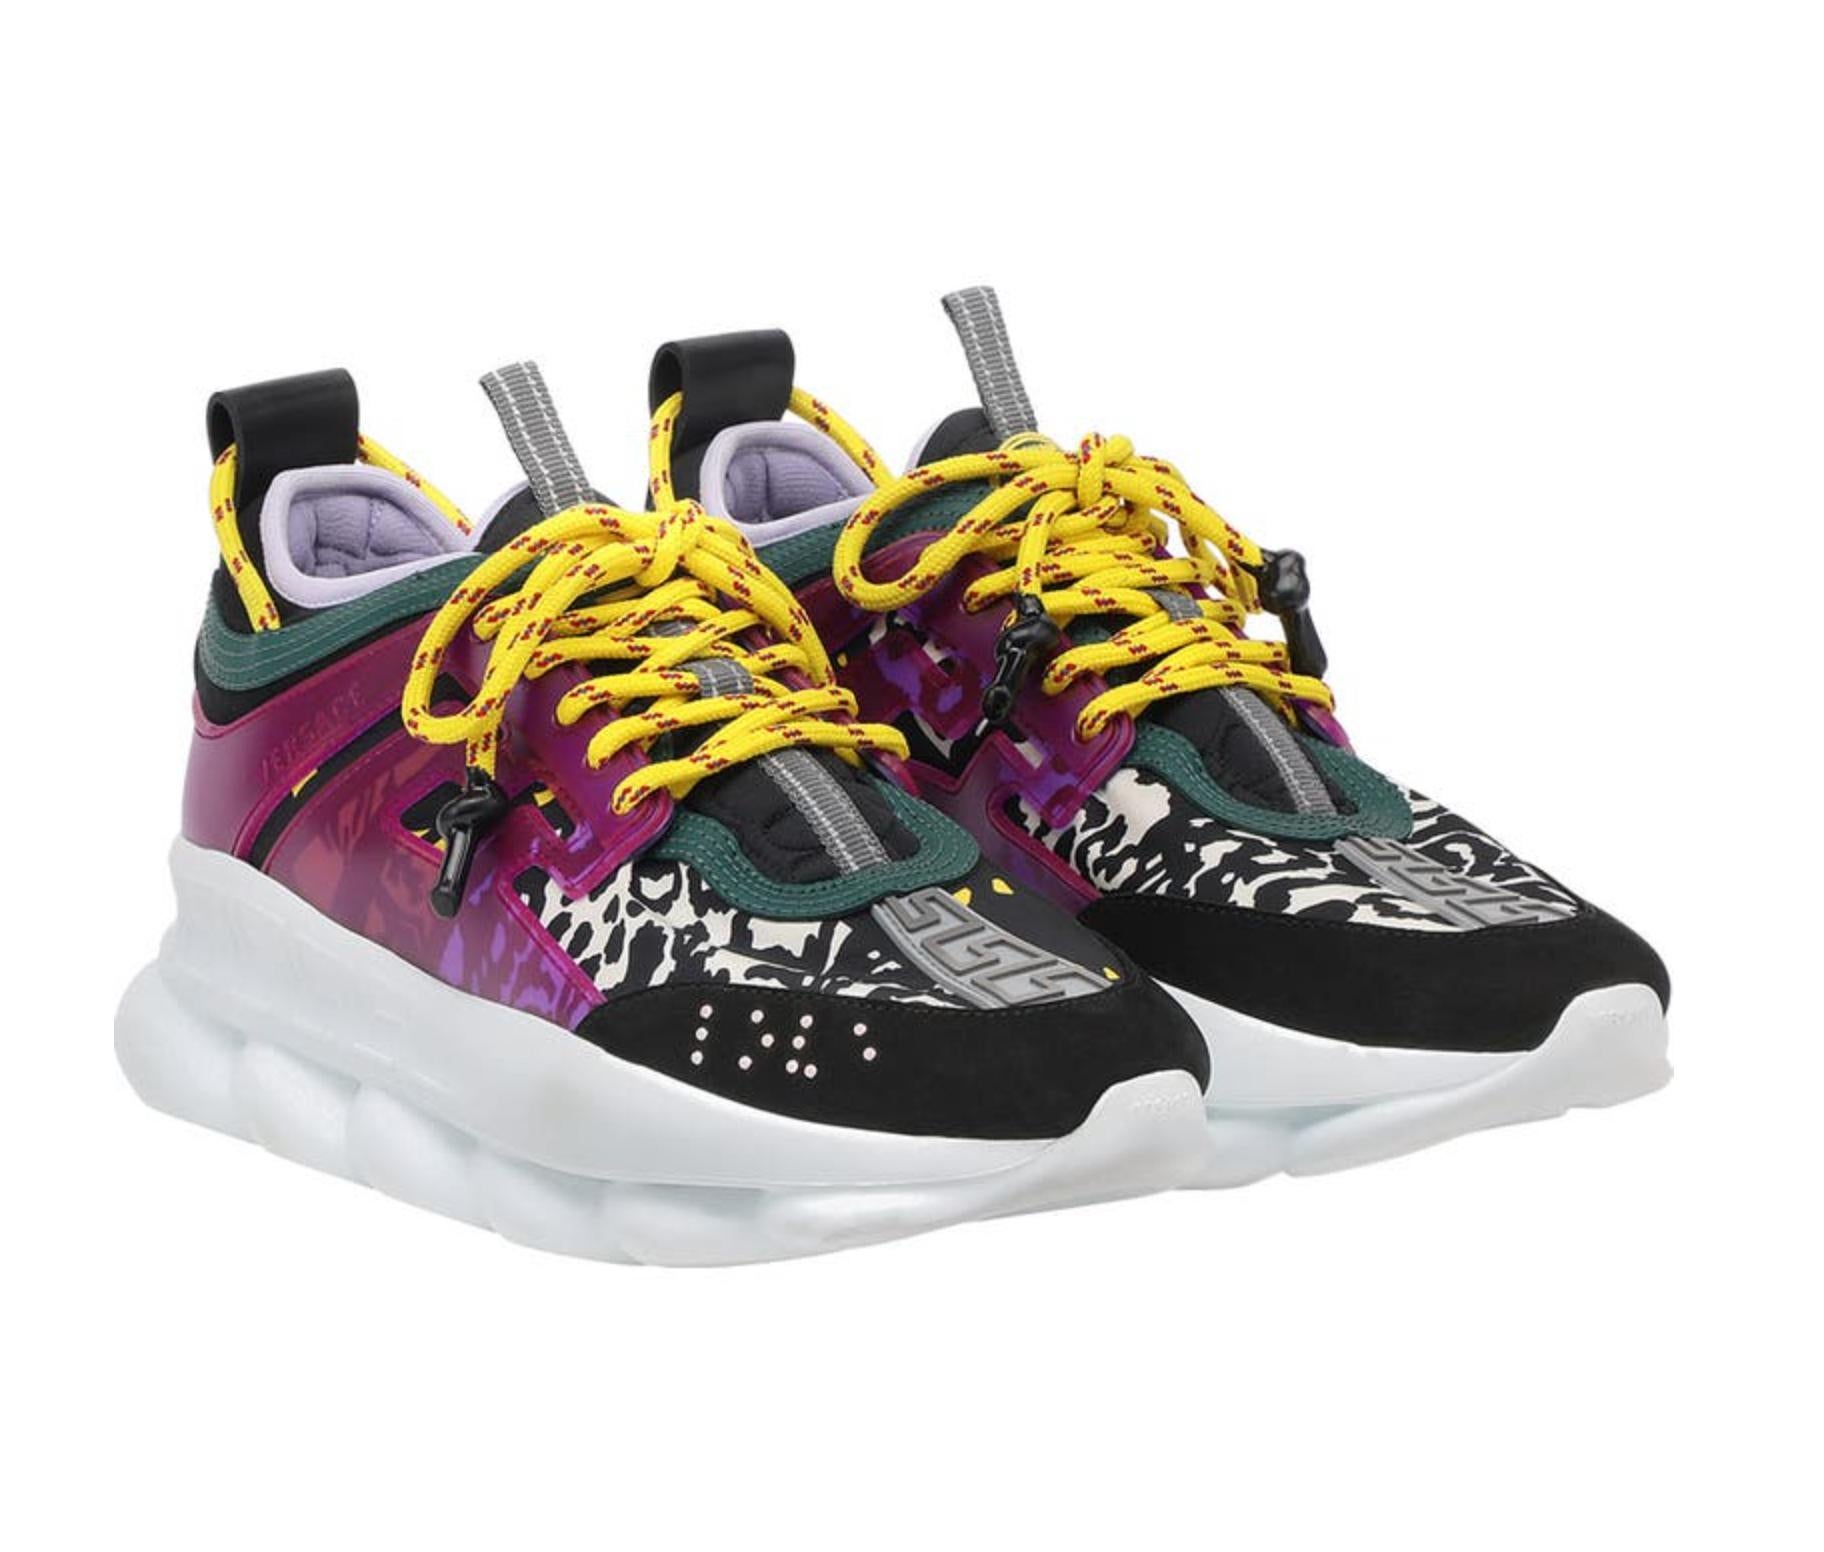 Released in Spring 2018, the women’s Chain Reaction 'Mega Mix’ from Versace is a sneaker designed in collaboration with rapper 2 Chainz and designer Salehe Bembury. It features a 